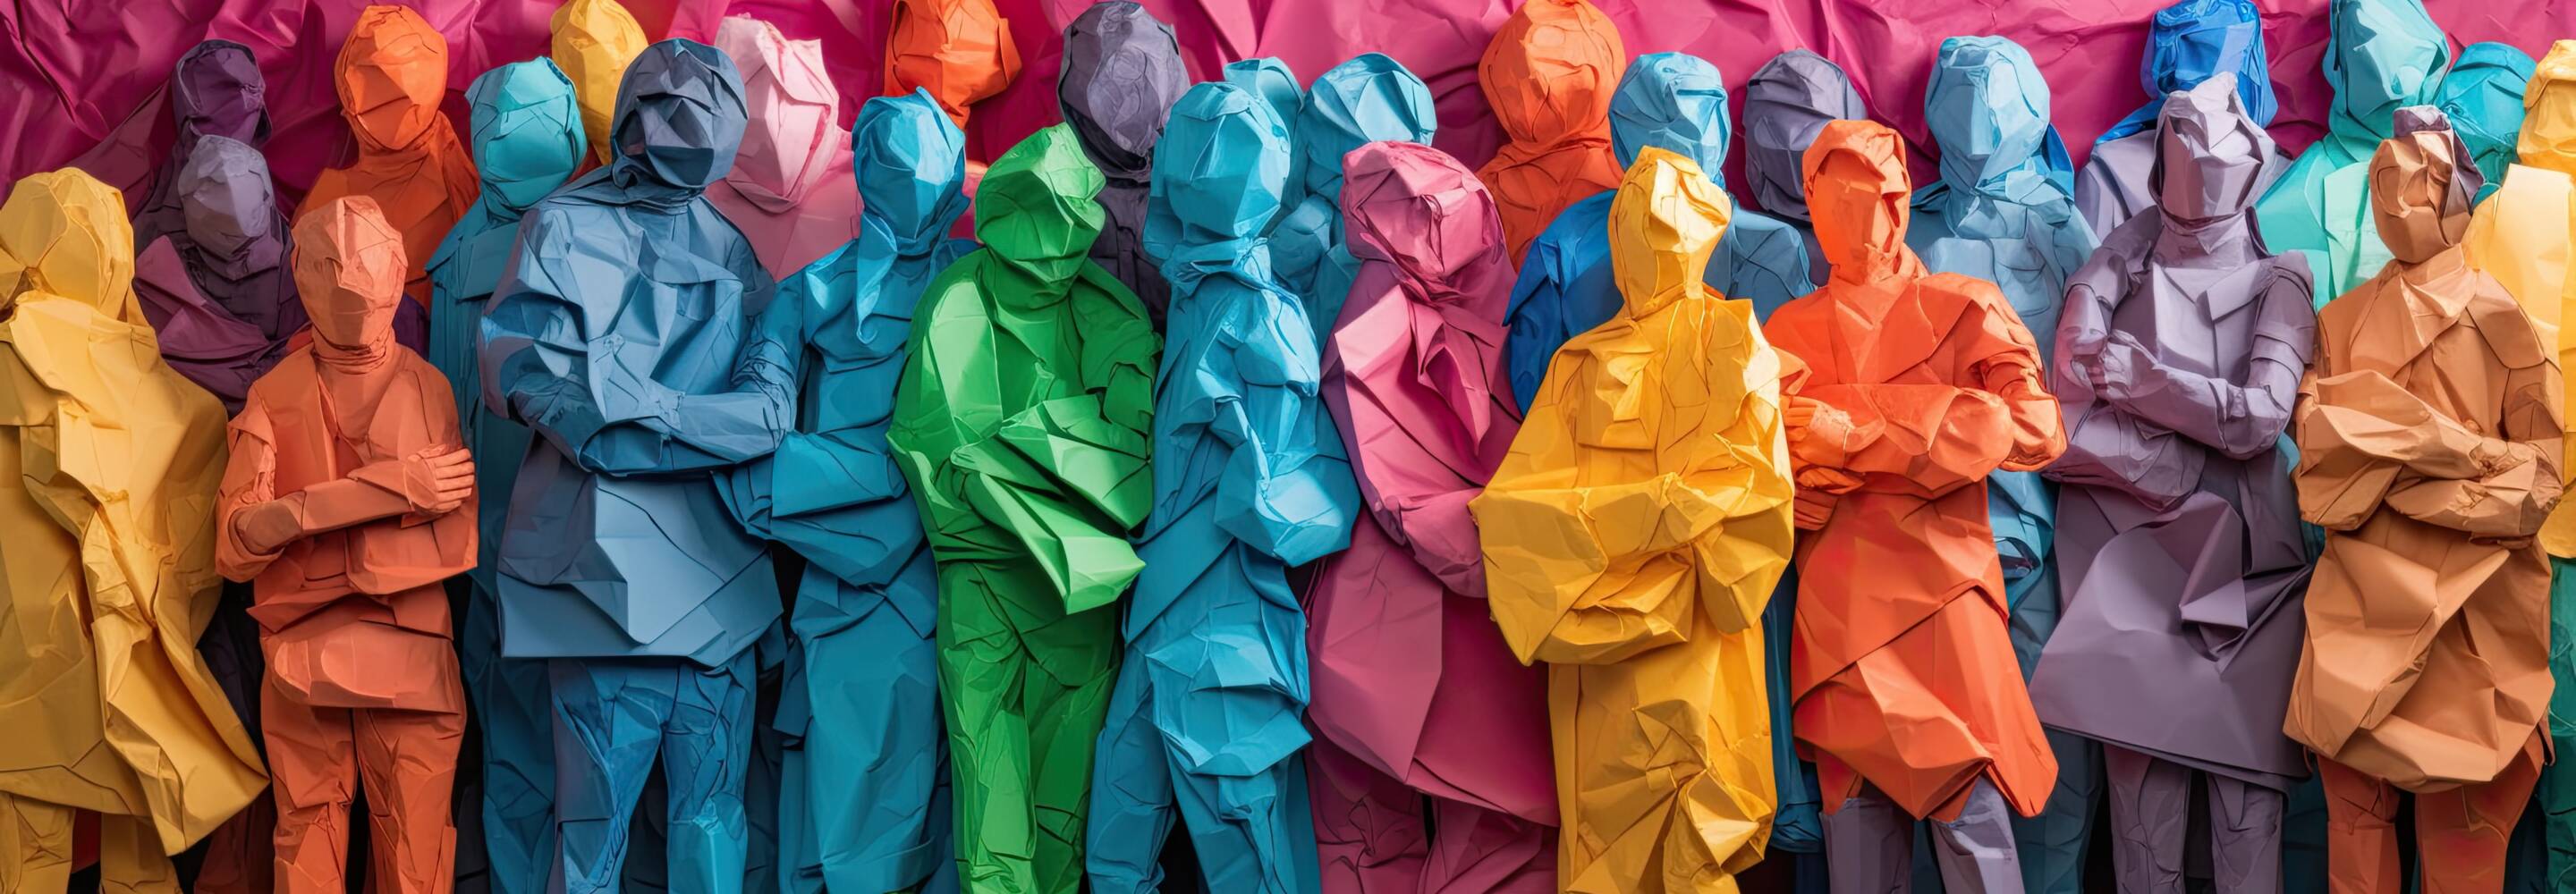 Colorful paper people